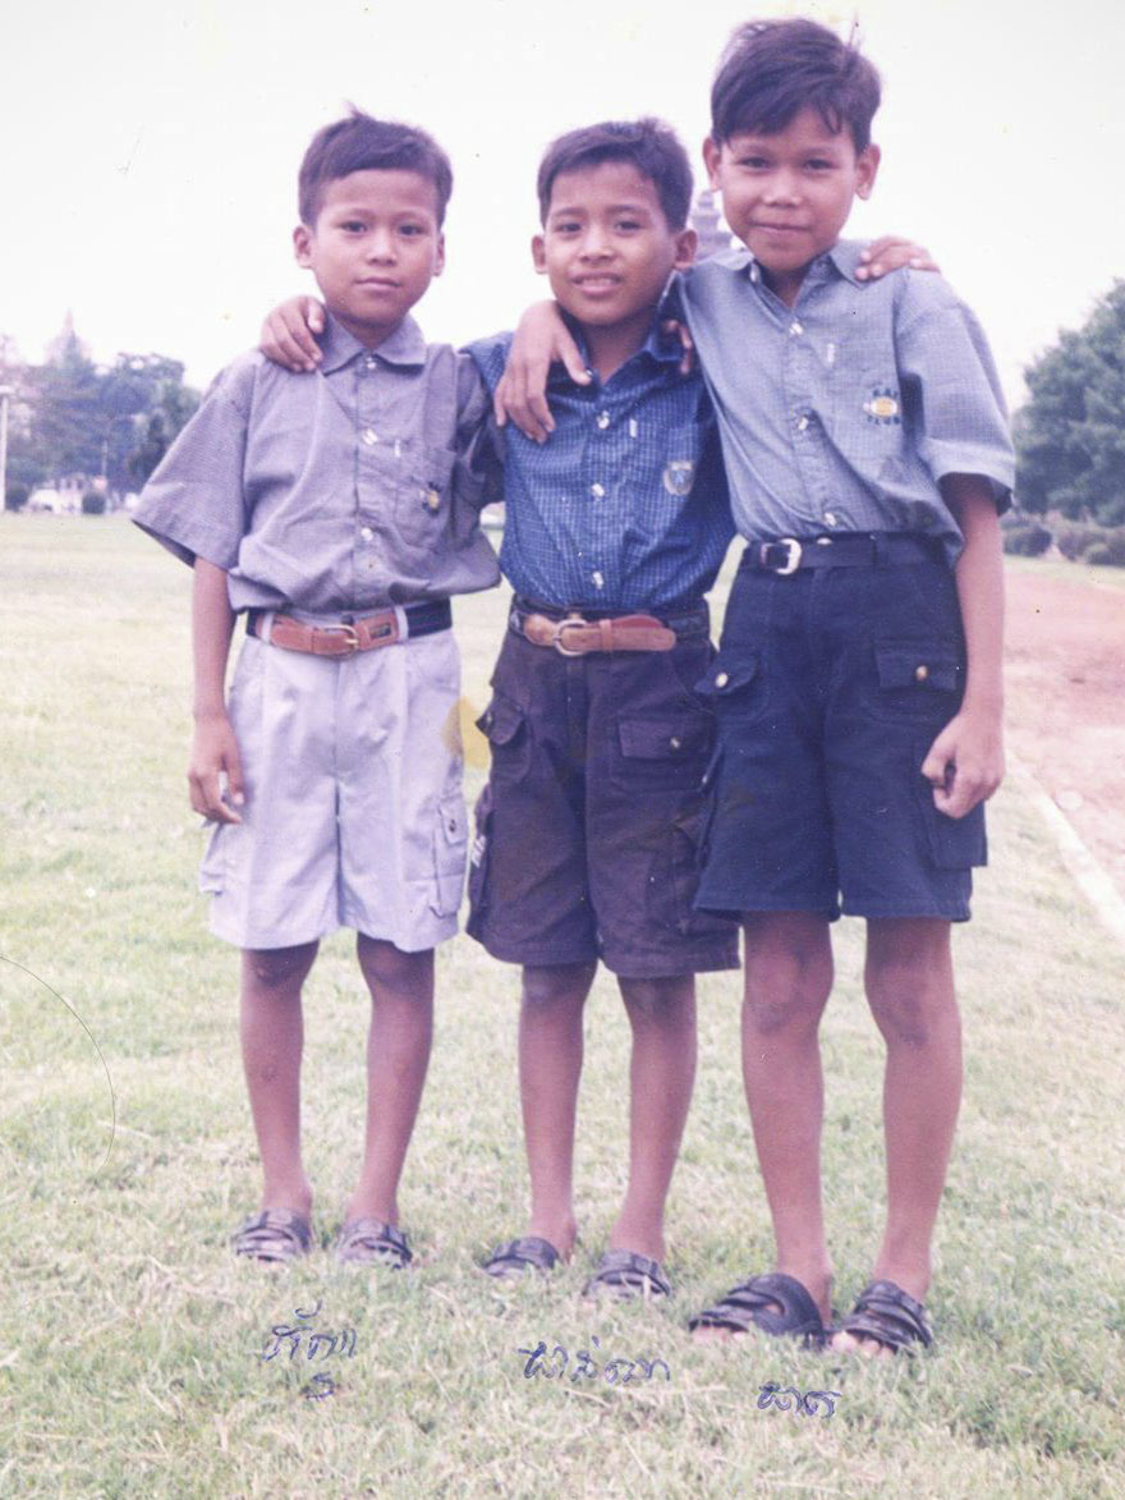 9 year-old Sophanna (in the middle) with his brothers in Phnom Penh, Cambodia. Sophanna lost his parents when he was 6 years old, and he was cared for by his grandparents before moving to an orphanage in Siem Reap in 2005. Image courtesy of Brak Sophanna.